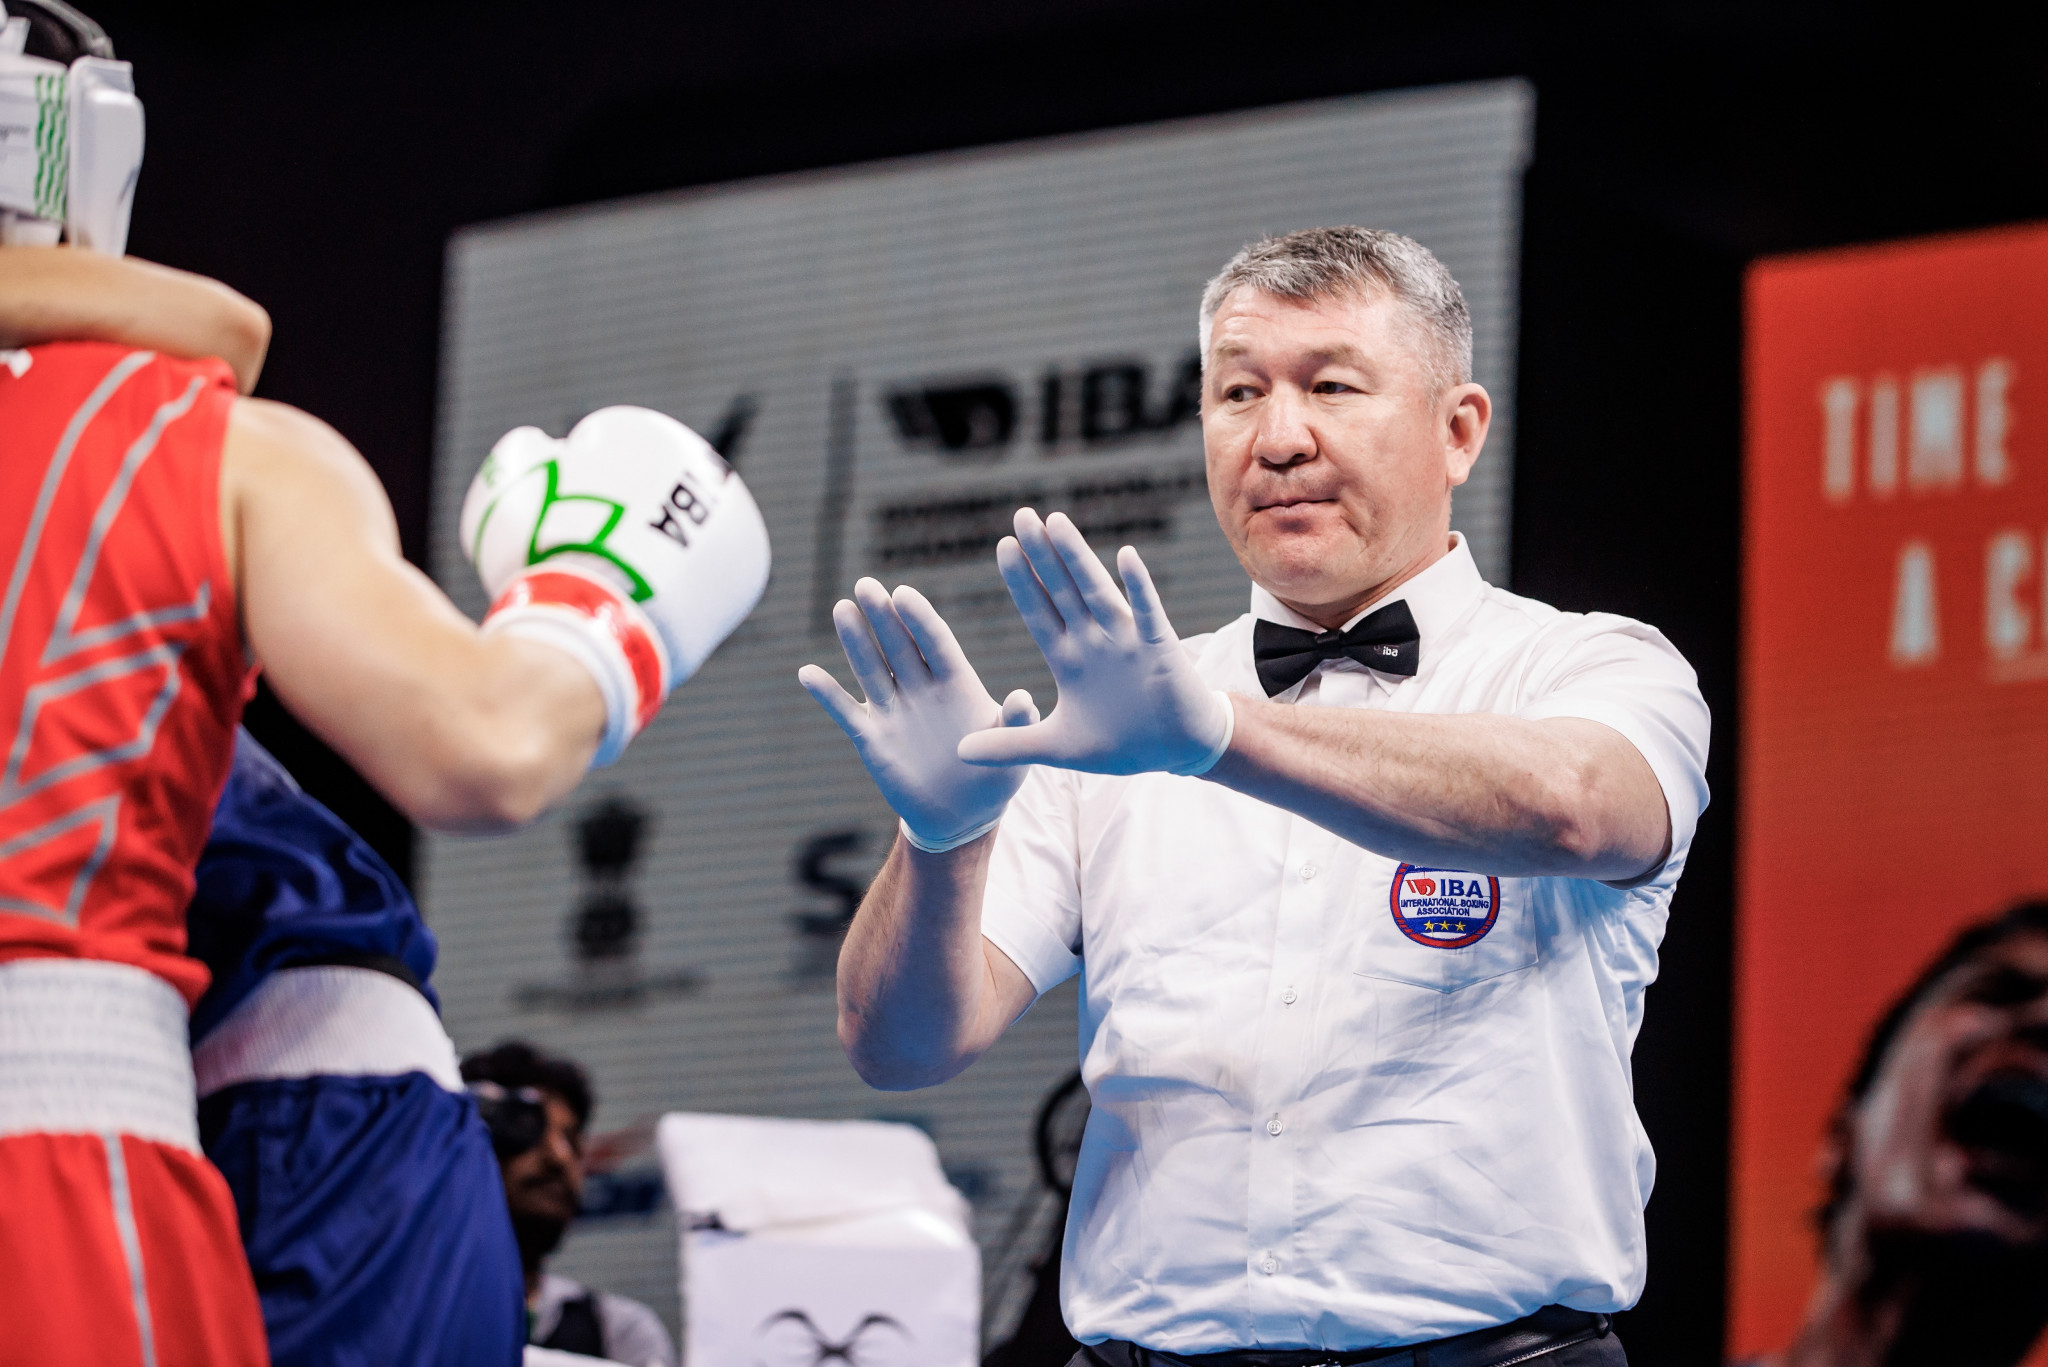 The IFSO has accused the IBA of putting referees and judges in a 